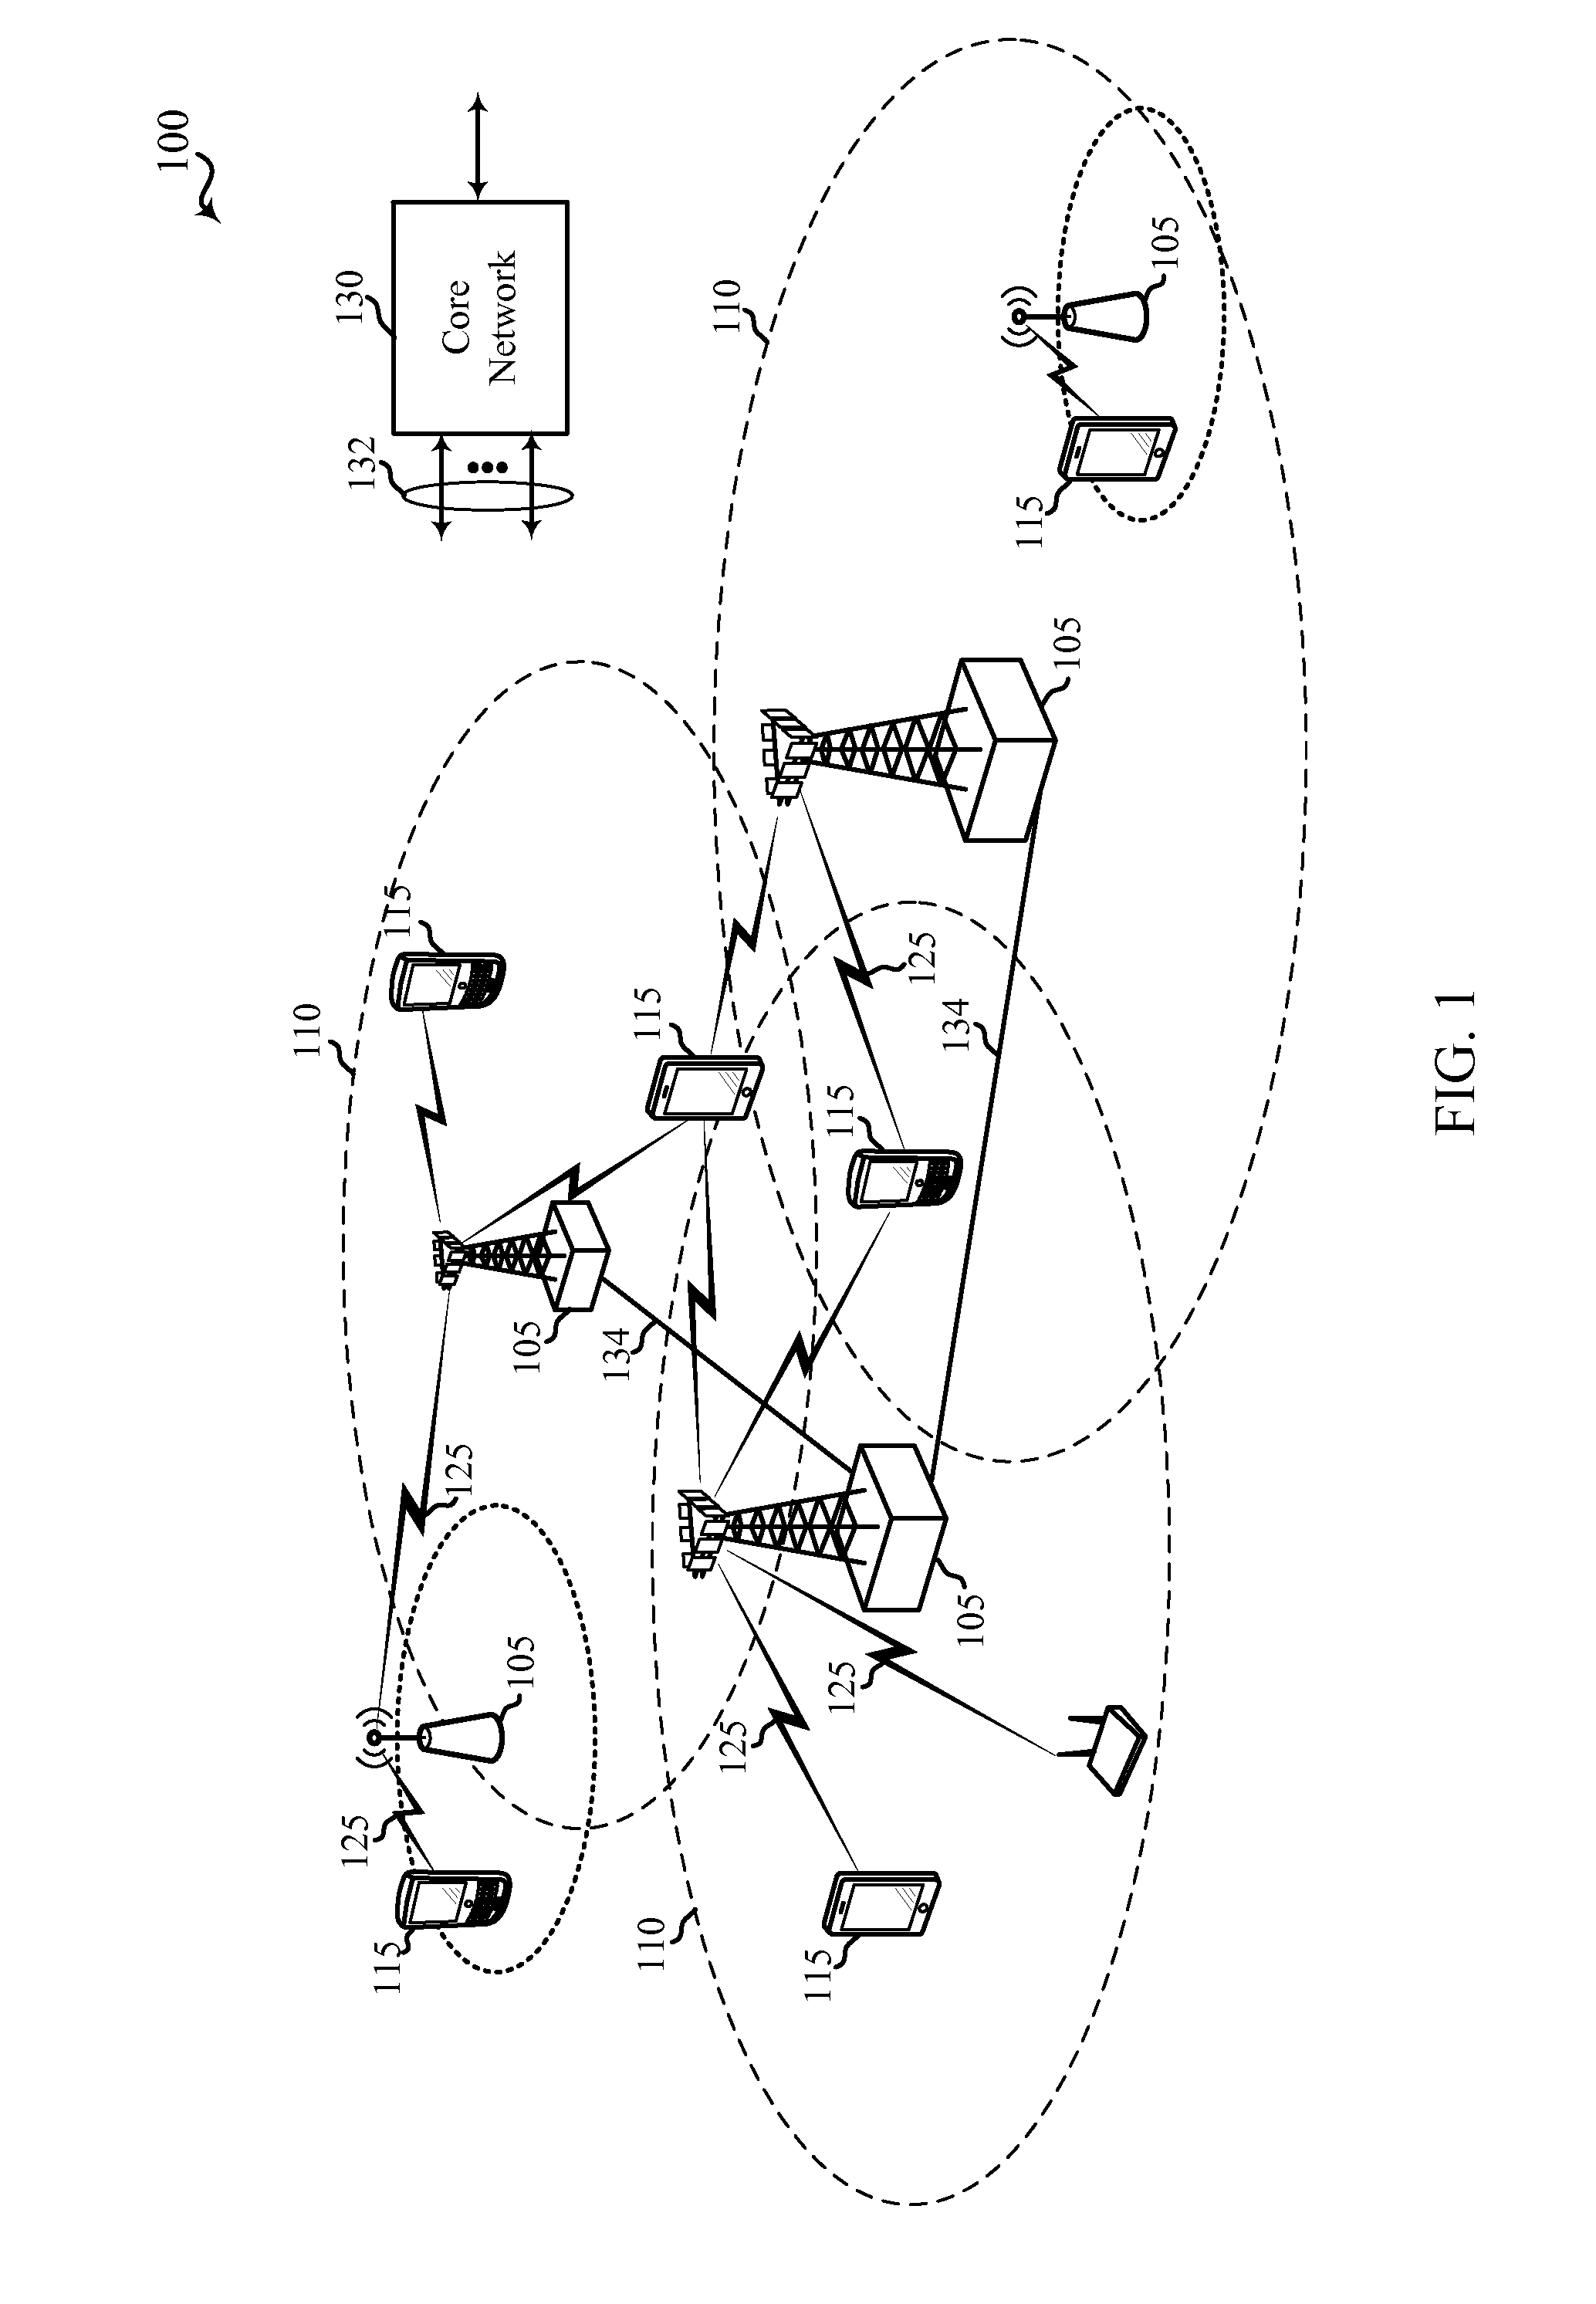 Non-orthogonal multiple access and interference cancellation